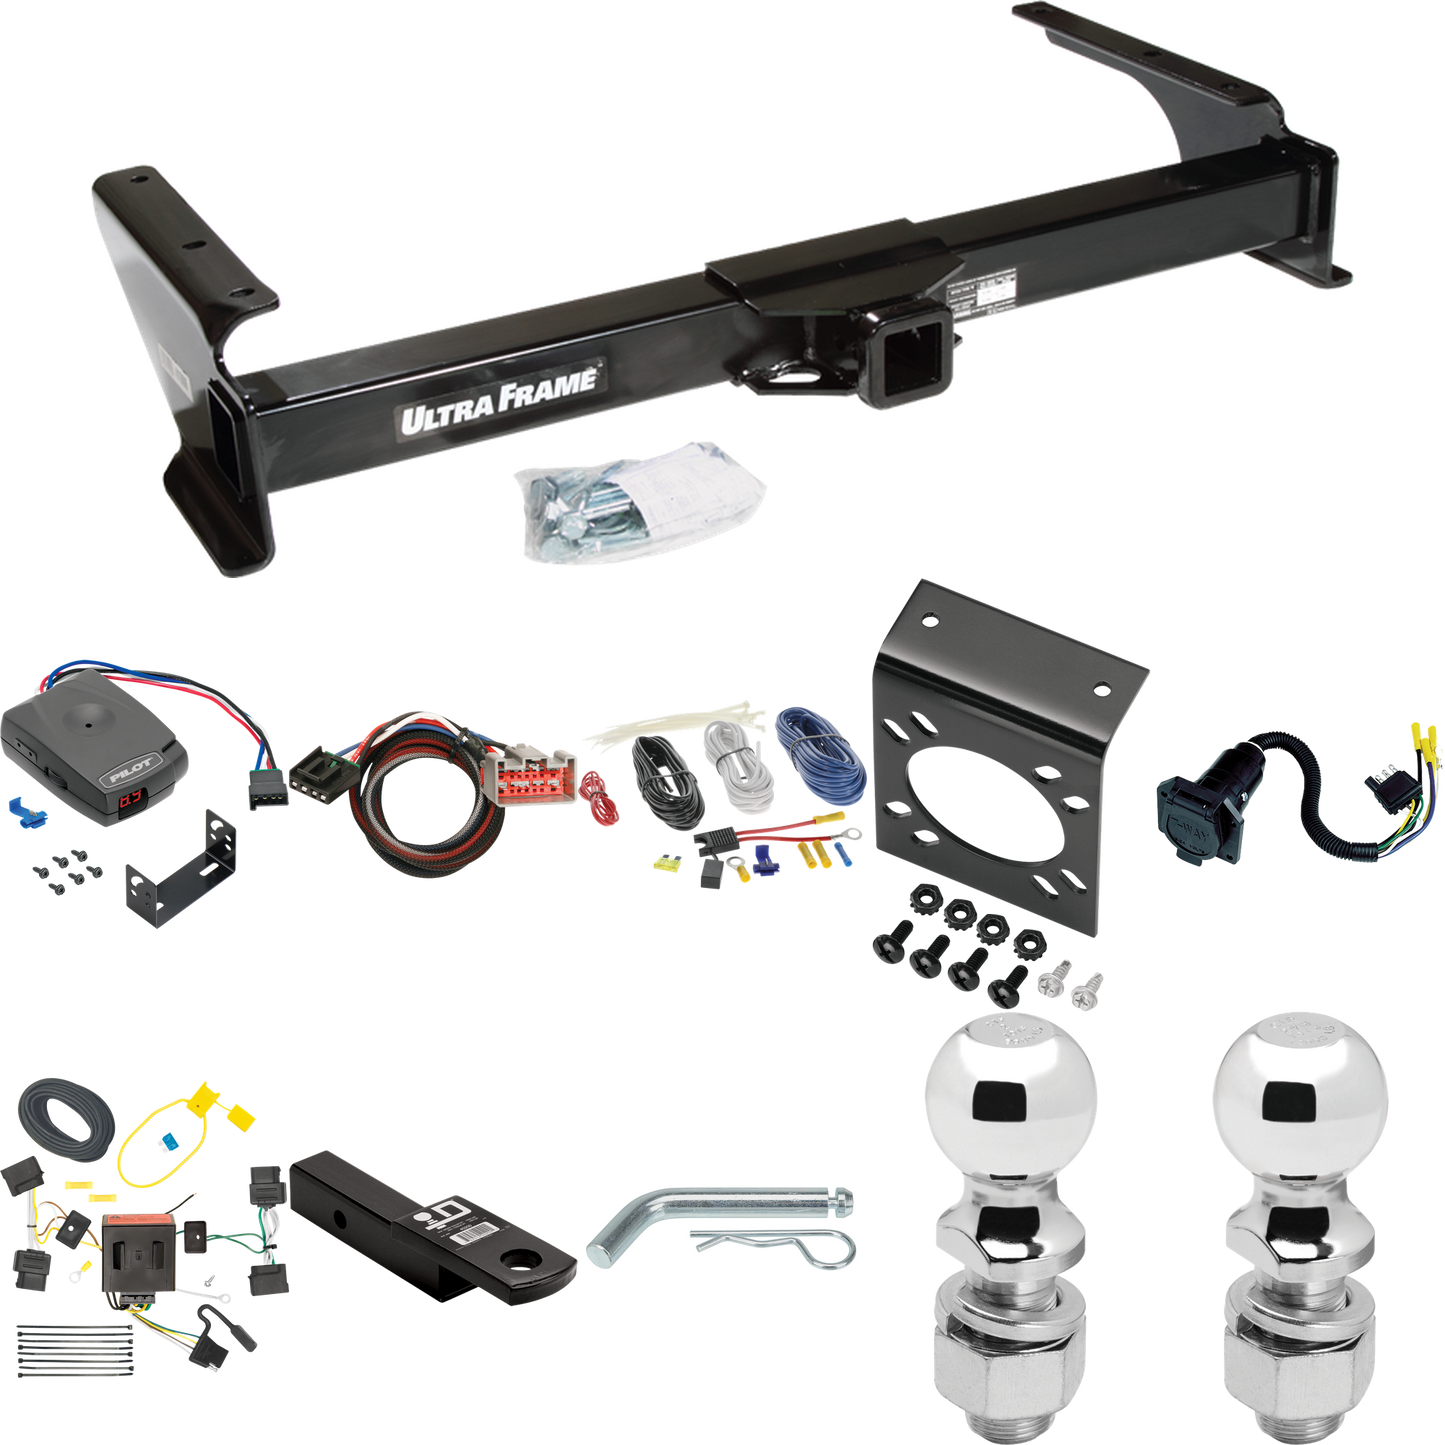 Fits 2009-2014 Ford E-250 Econoline Trailer Hitch Tow PKG w/ Pro Series Pilot Brake Control + Plug & Play BC Adapter + 7-Way RV Wiring + 2" & 2-5/16" Ball & Drop Mount By Draw-Tite